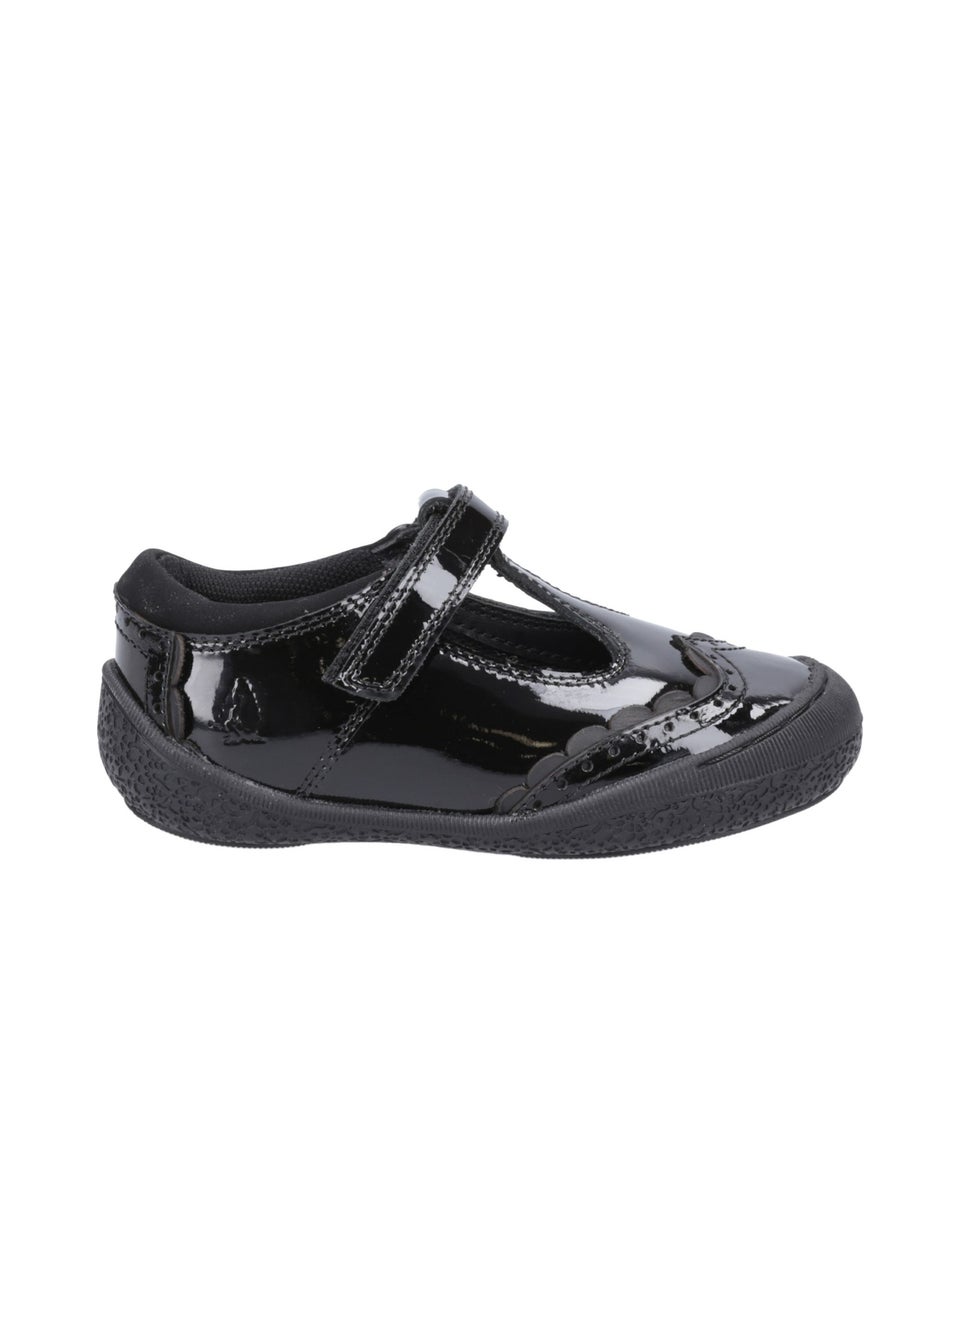 Hush Puppies Girls Black Mabel Patent Inf School Shoes (Younger 6-9.5)